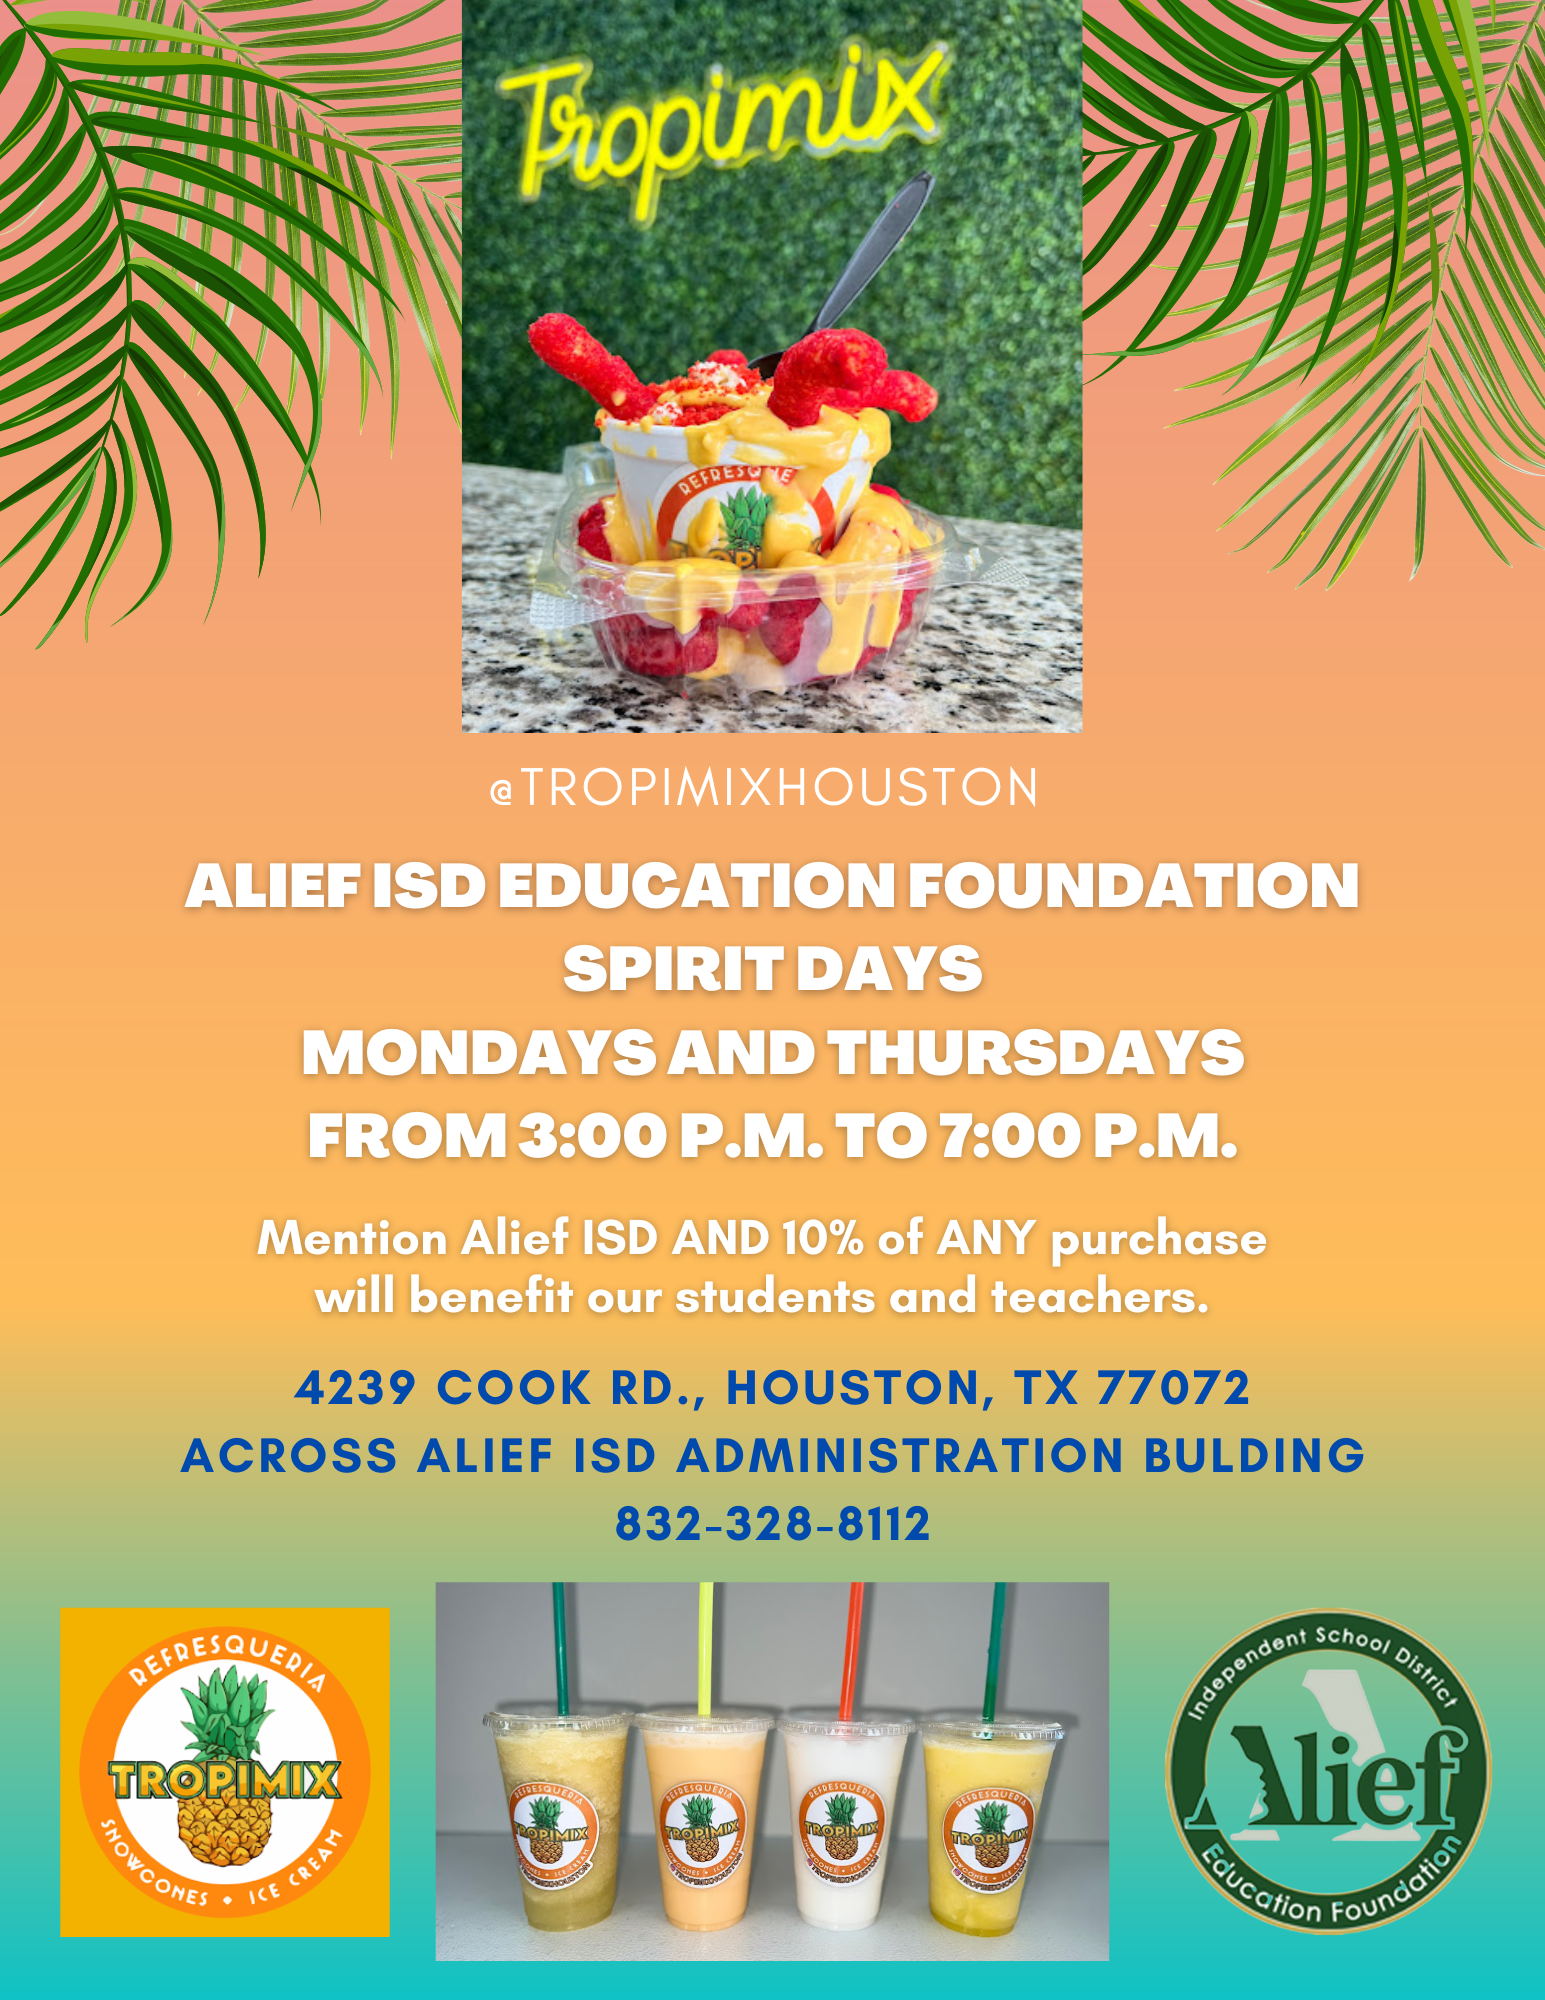 @TropiMixHouston Alief ISD Education Foundation Spirit Days Mondays & Thursdays From 3:00pm to 7:00p, Mention Alief ISD and 10% of ANY purchase will benefit our students and teachers. 4239 Cook Rd., Houston, TX 77072 Across from the Alief ISD Administration Building. (832)328-8112